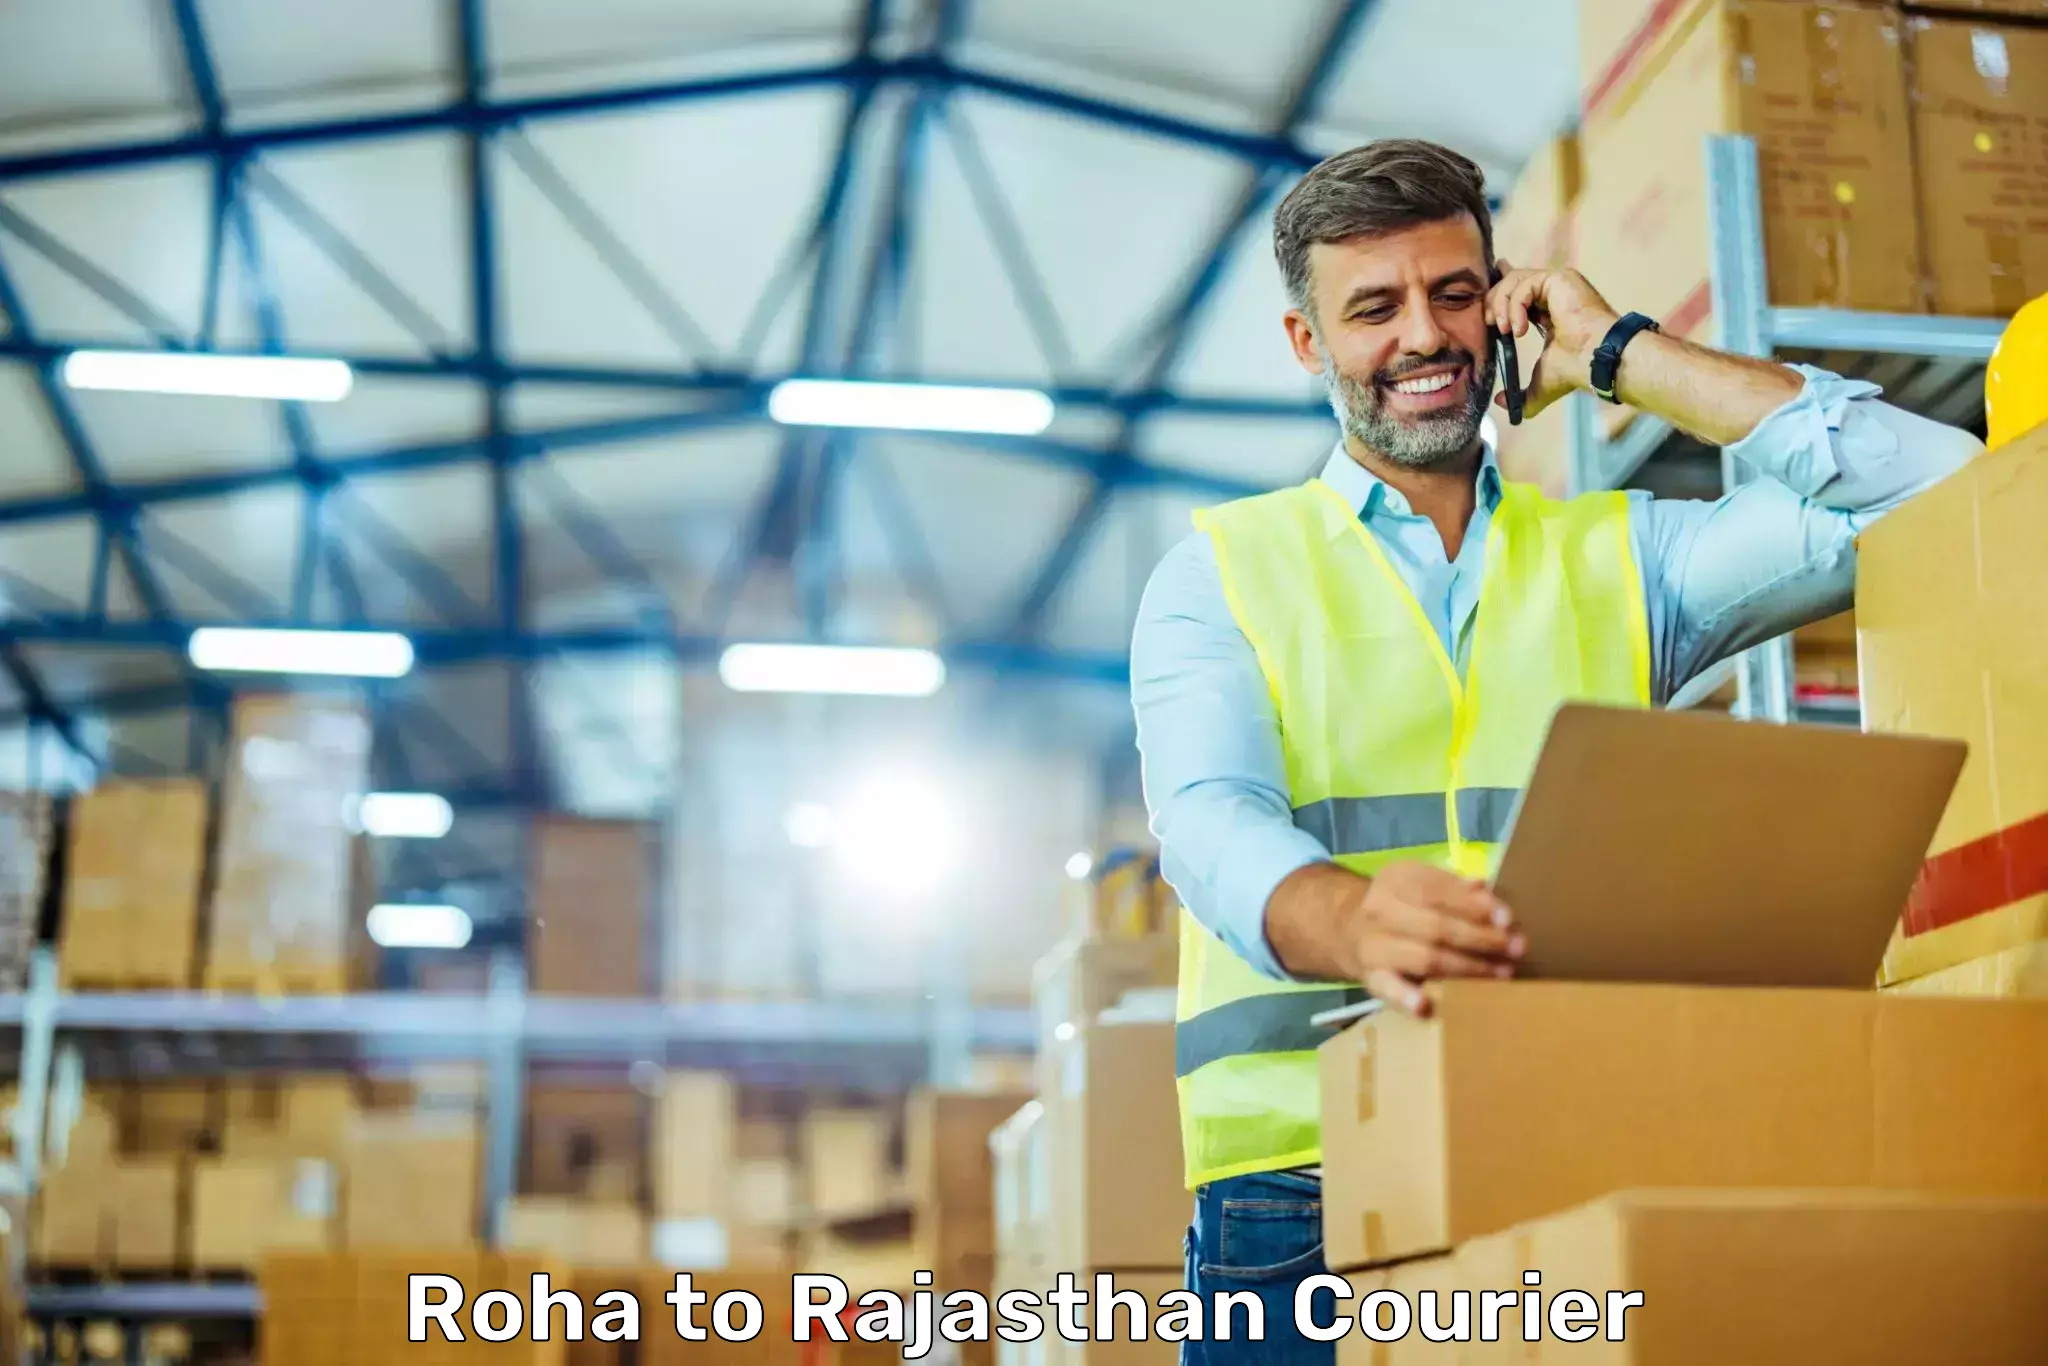 On-call courier service Roha to Asind